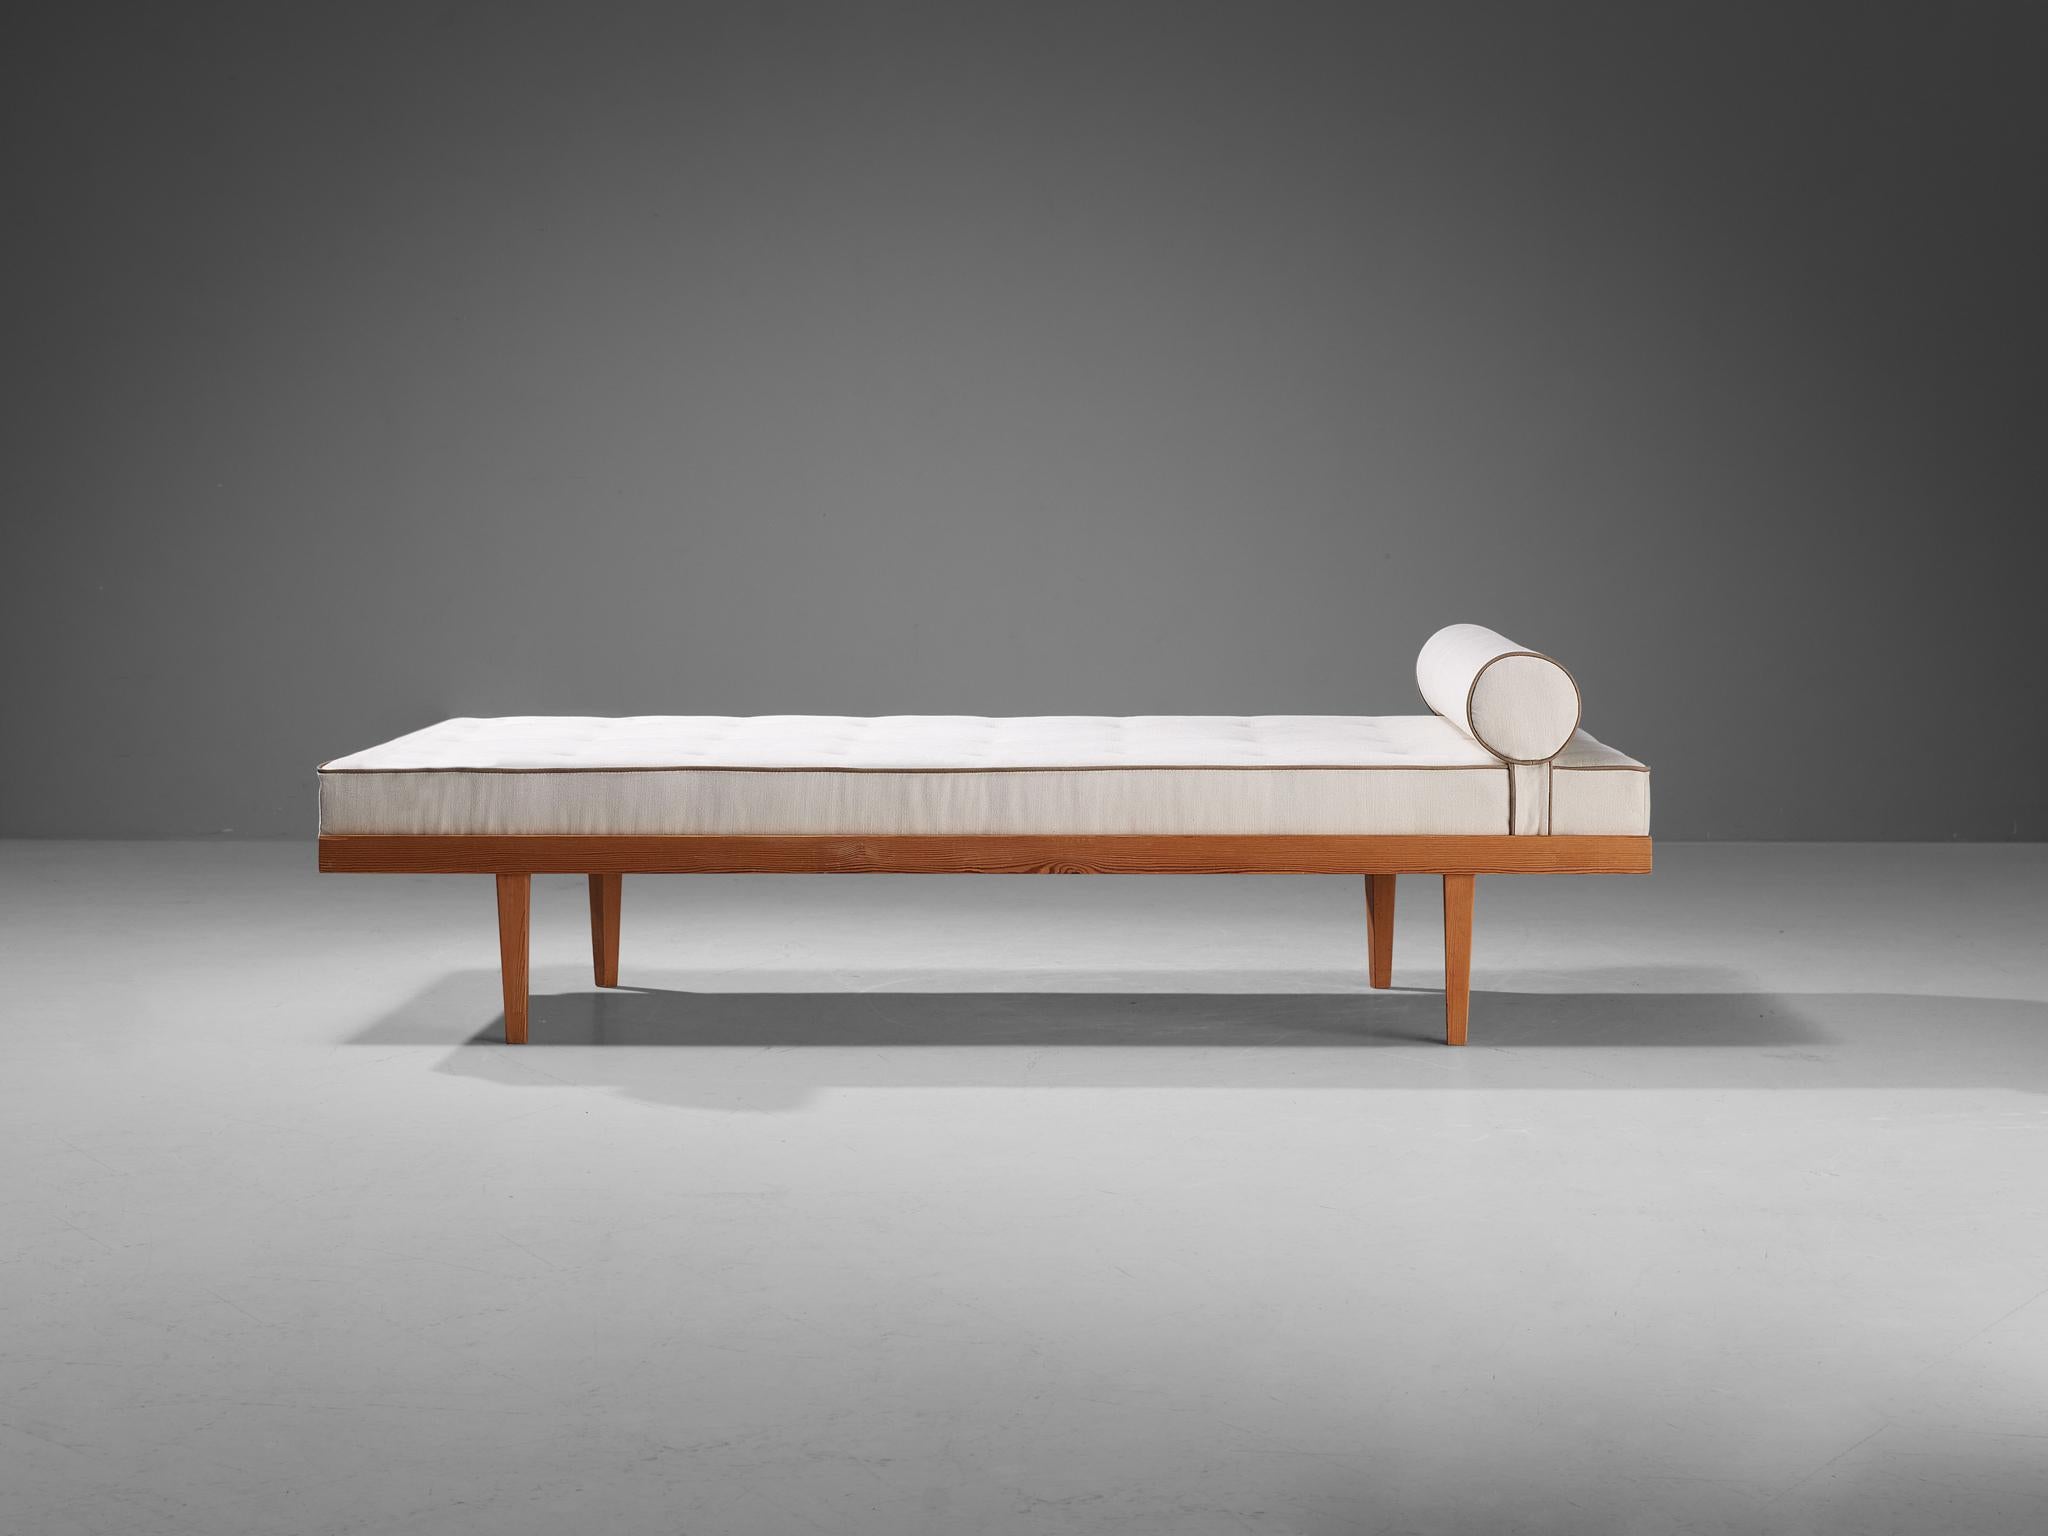 Poul M. Volther for FDB Møbler, daybed, pine, Denmark, 1960s

A simple and minimalist bed designed by Danish furniture designer Poul M. Volther (1923-2001). The construction is based on clear lines and angular shapes. Its simple and pure exterior